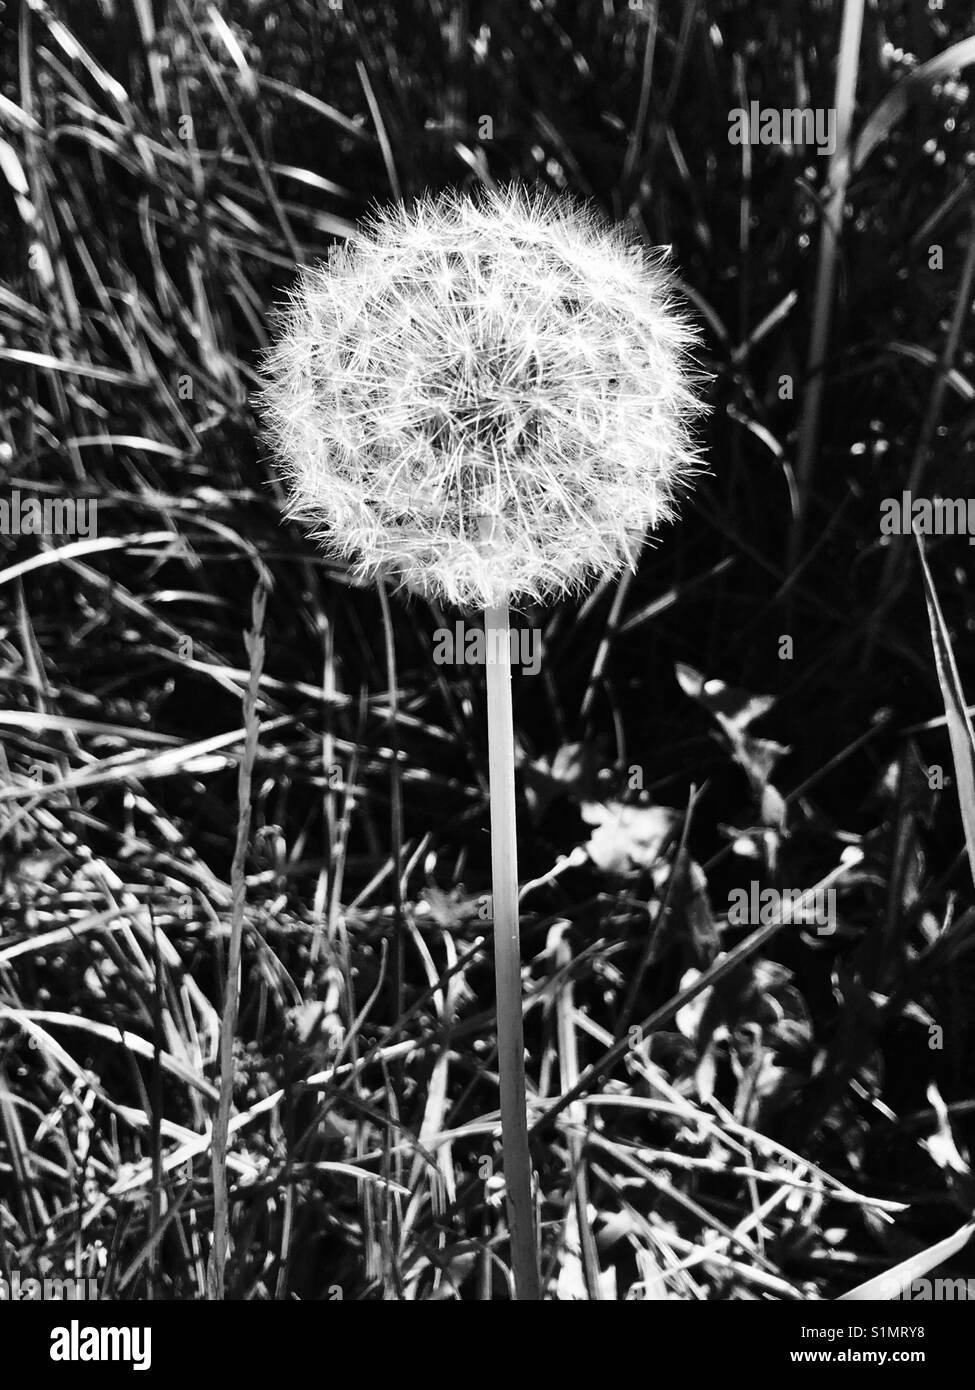 Dandelion seed head plant, black and white Stock Photo